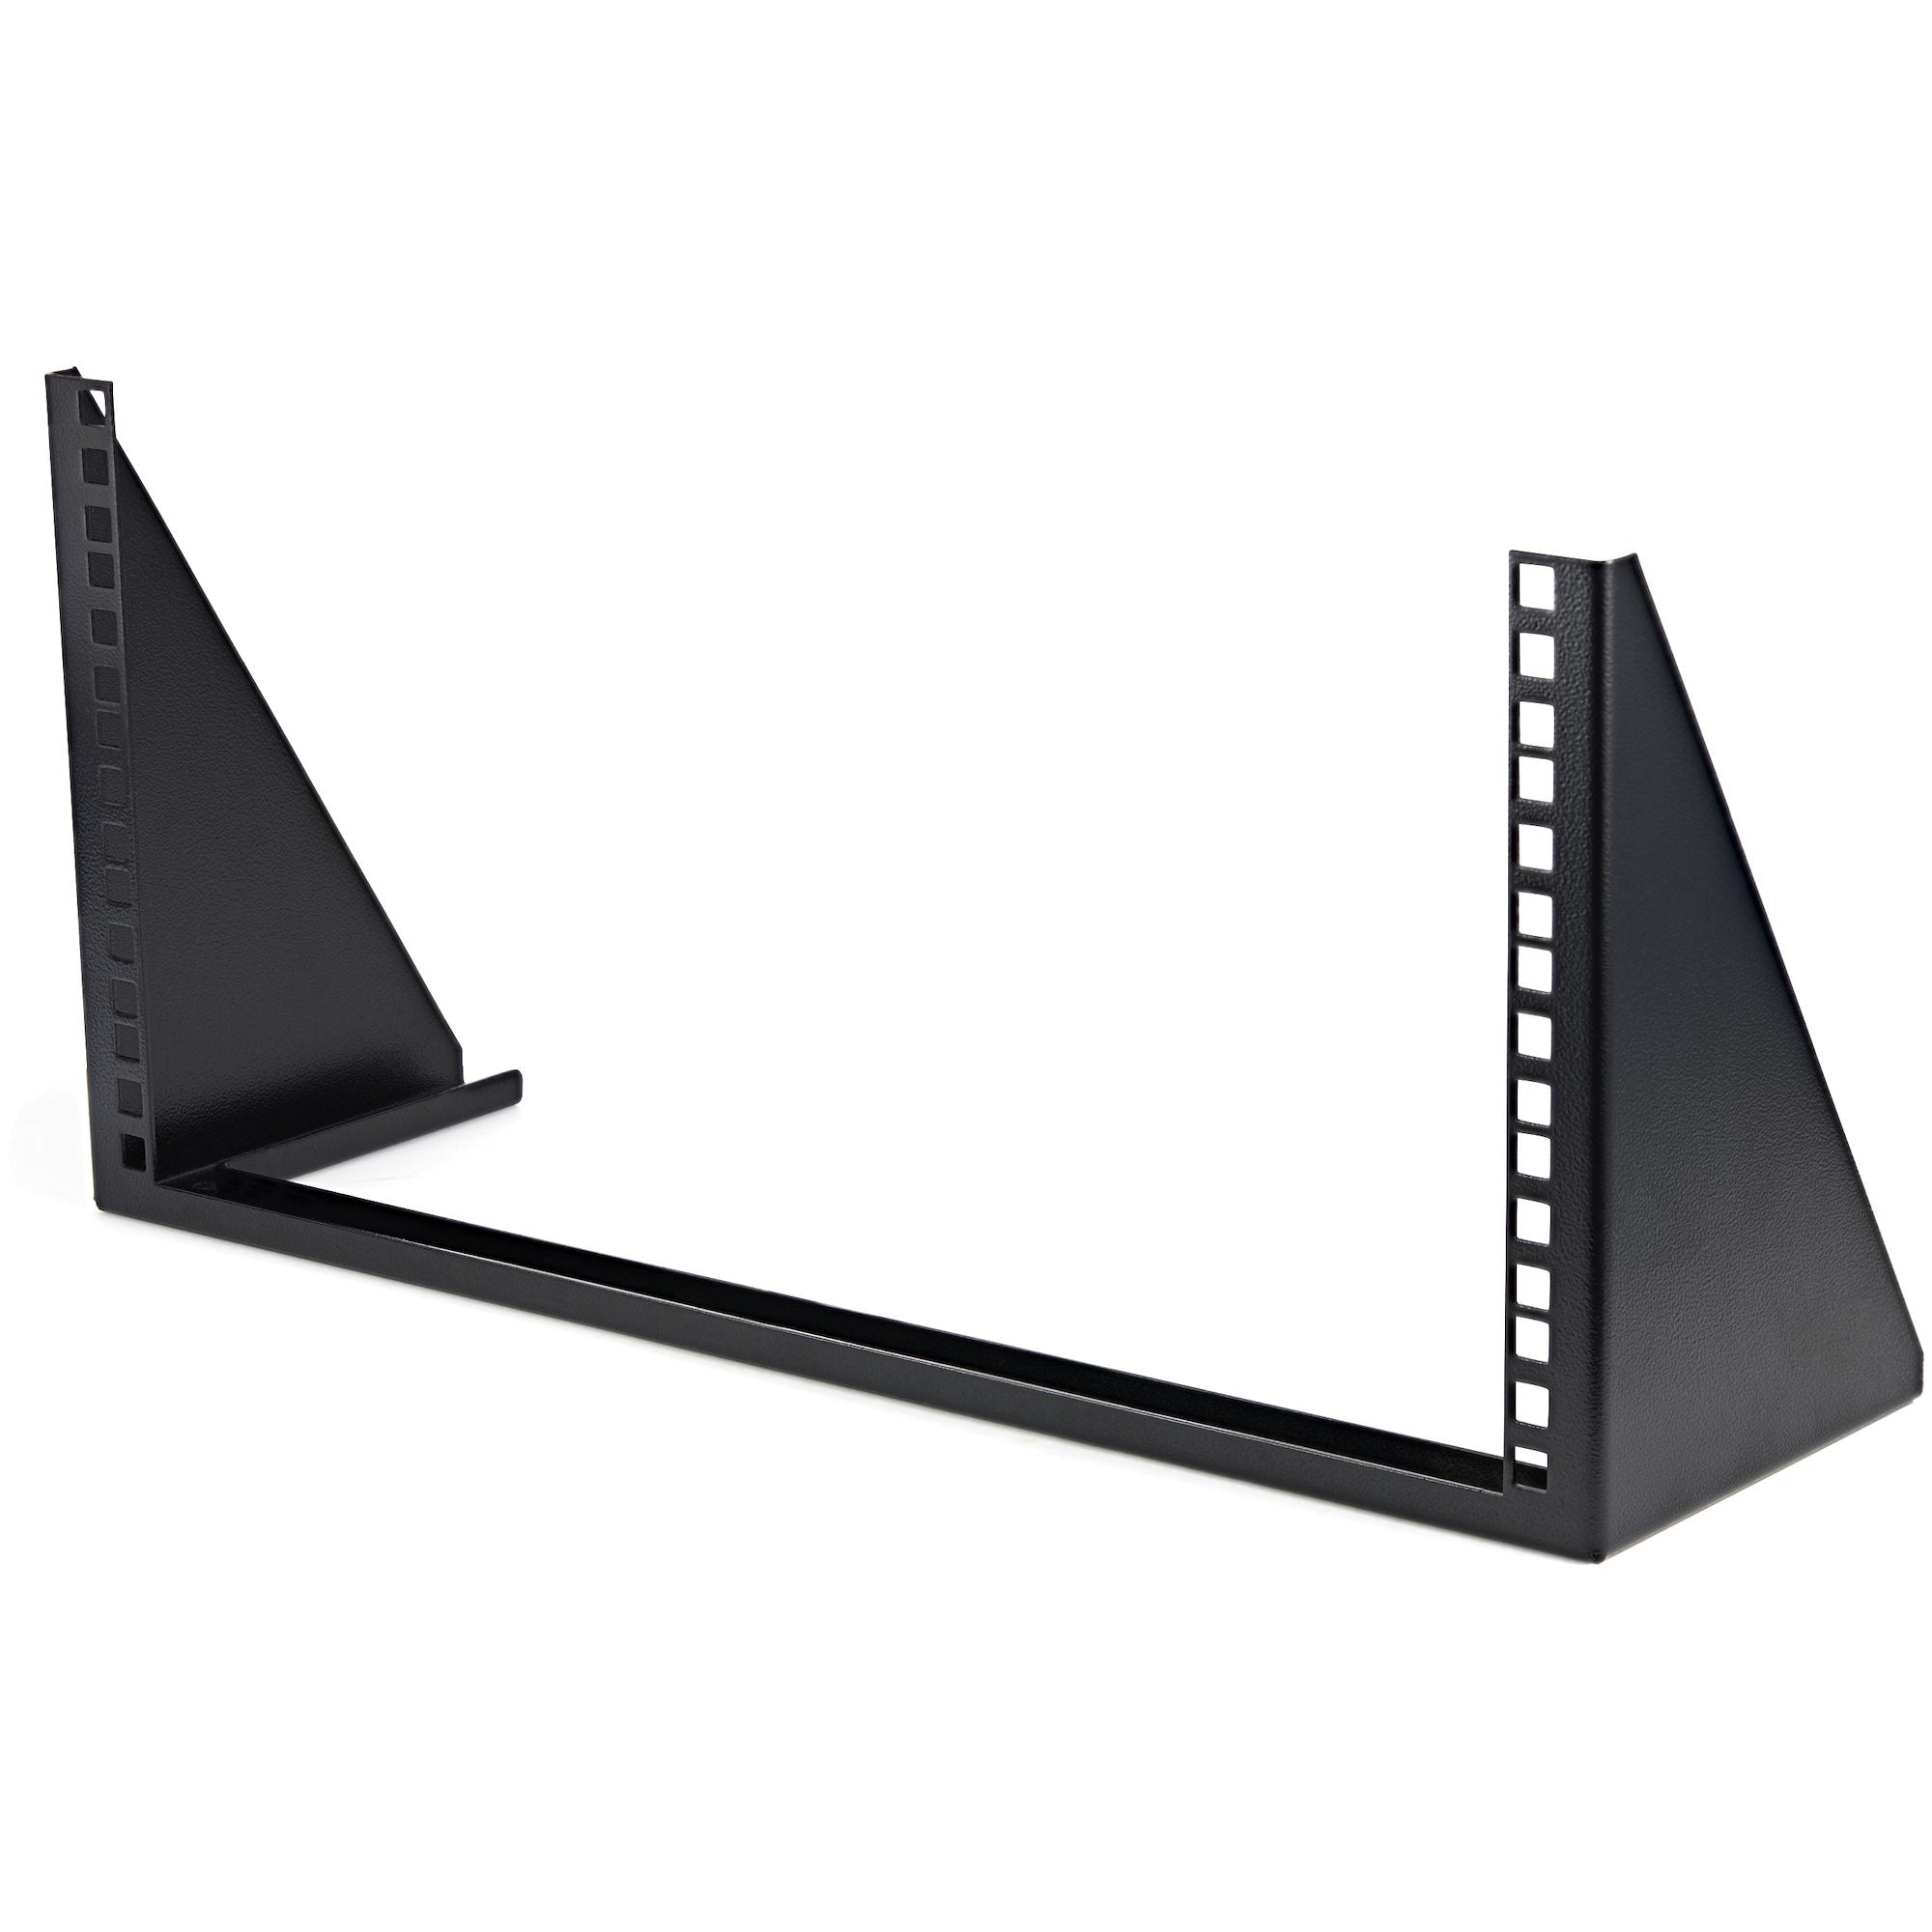 5U Vertical Wall Mount Rack - 19in Low Profile Open Wall Mounting Bracket - Network/Server Room/Data/AV/IT/Patch Panel/Communication/Computer Equipment - w/ Cage Nuts/Screws